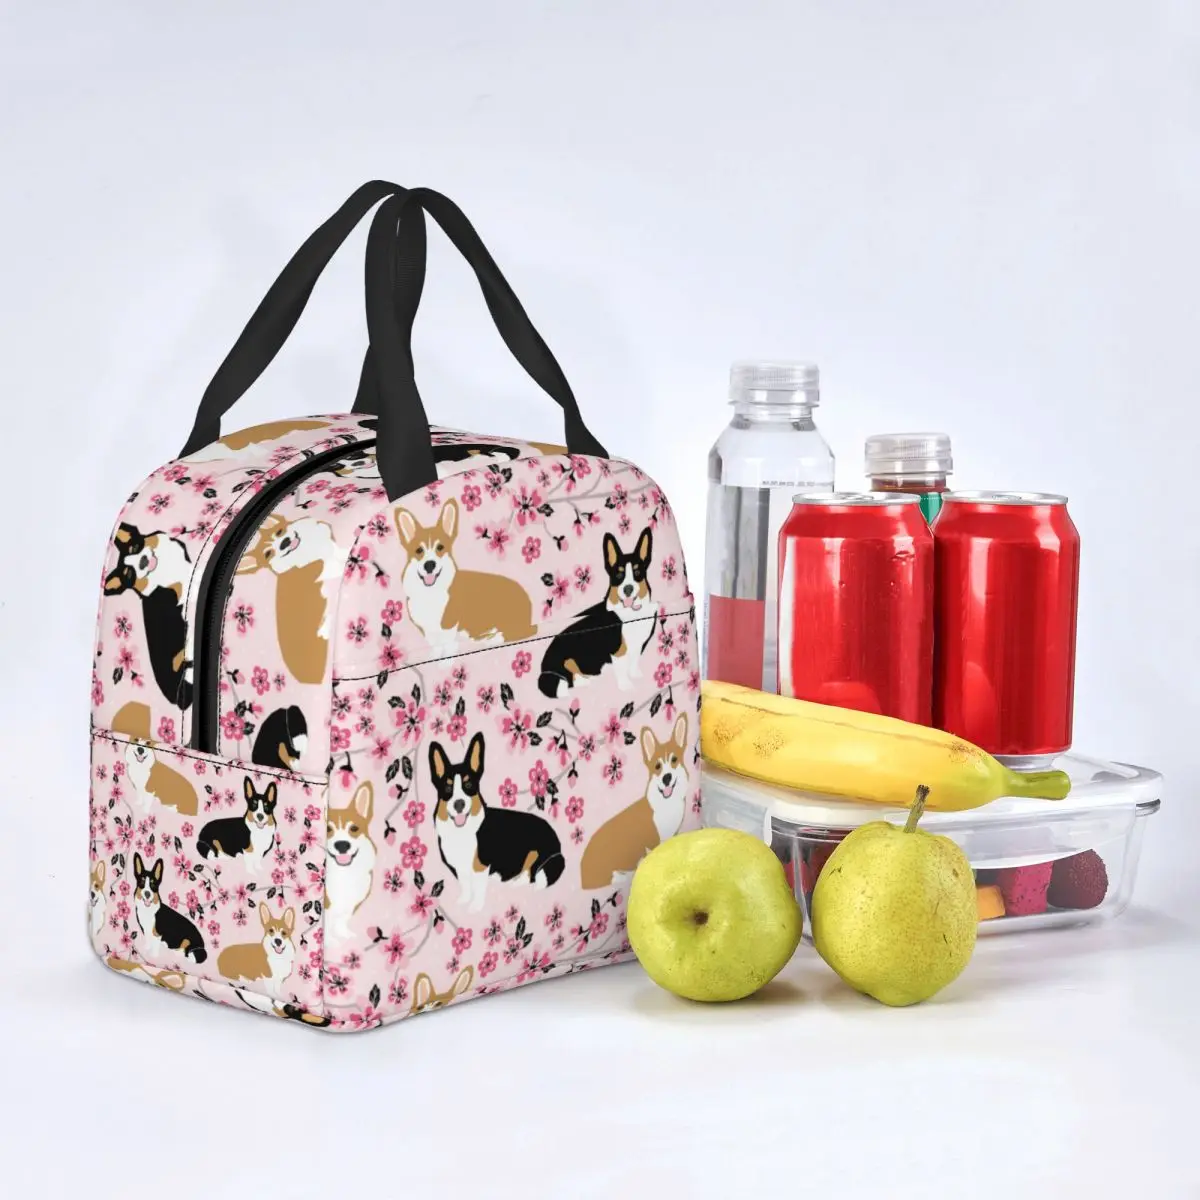 Lunch Bag for Men Women Corgi Dogs Pink Cherry Blossom Floral Thermal Cooler Waterproof Picnic Animal Lunch Box Food Storage Bag